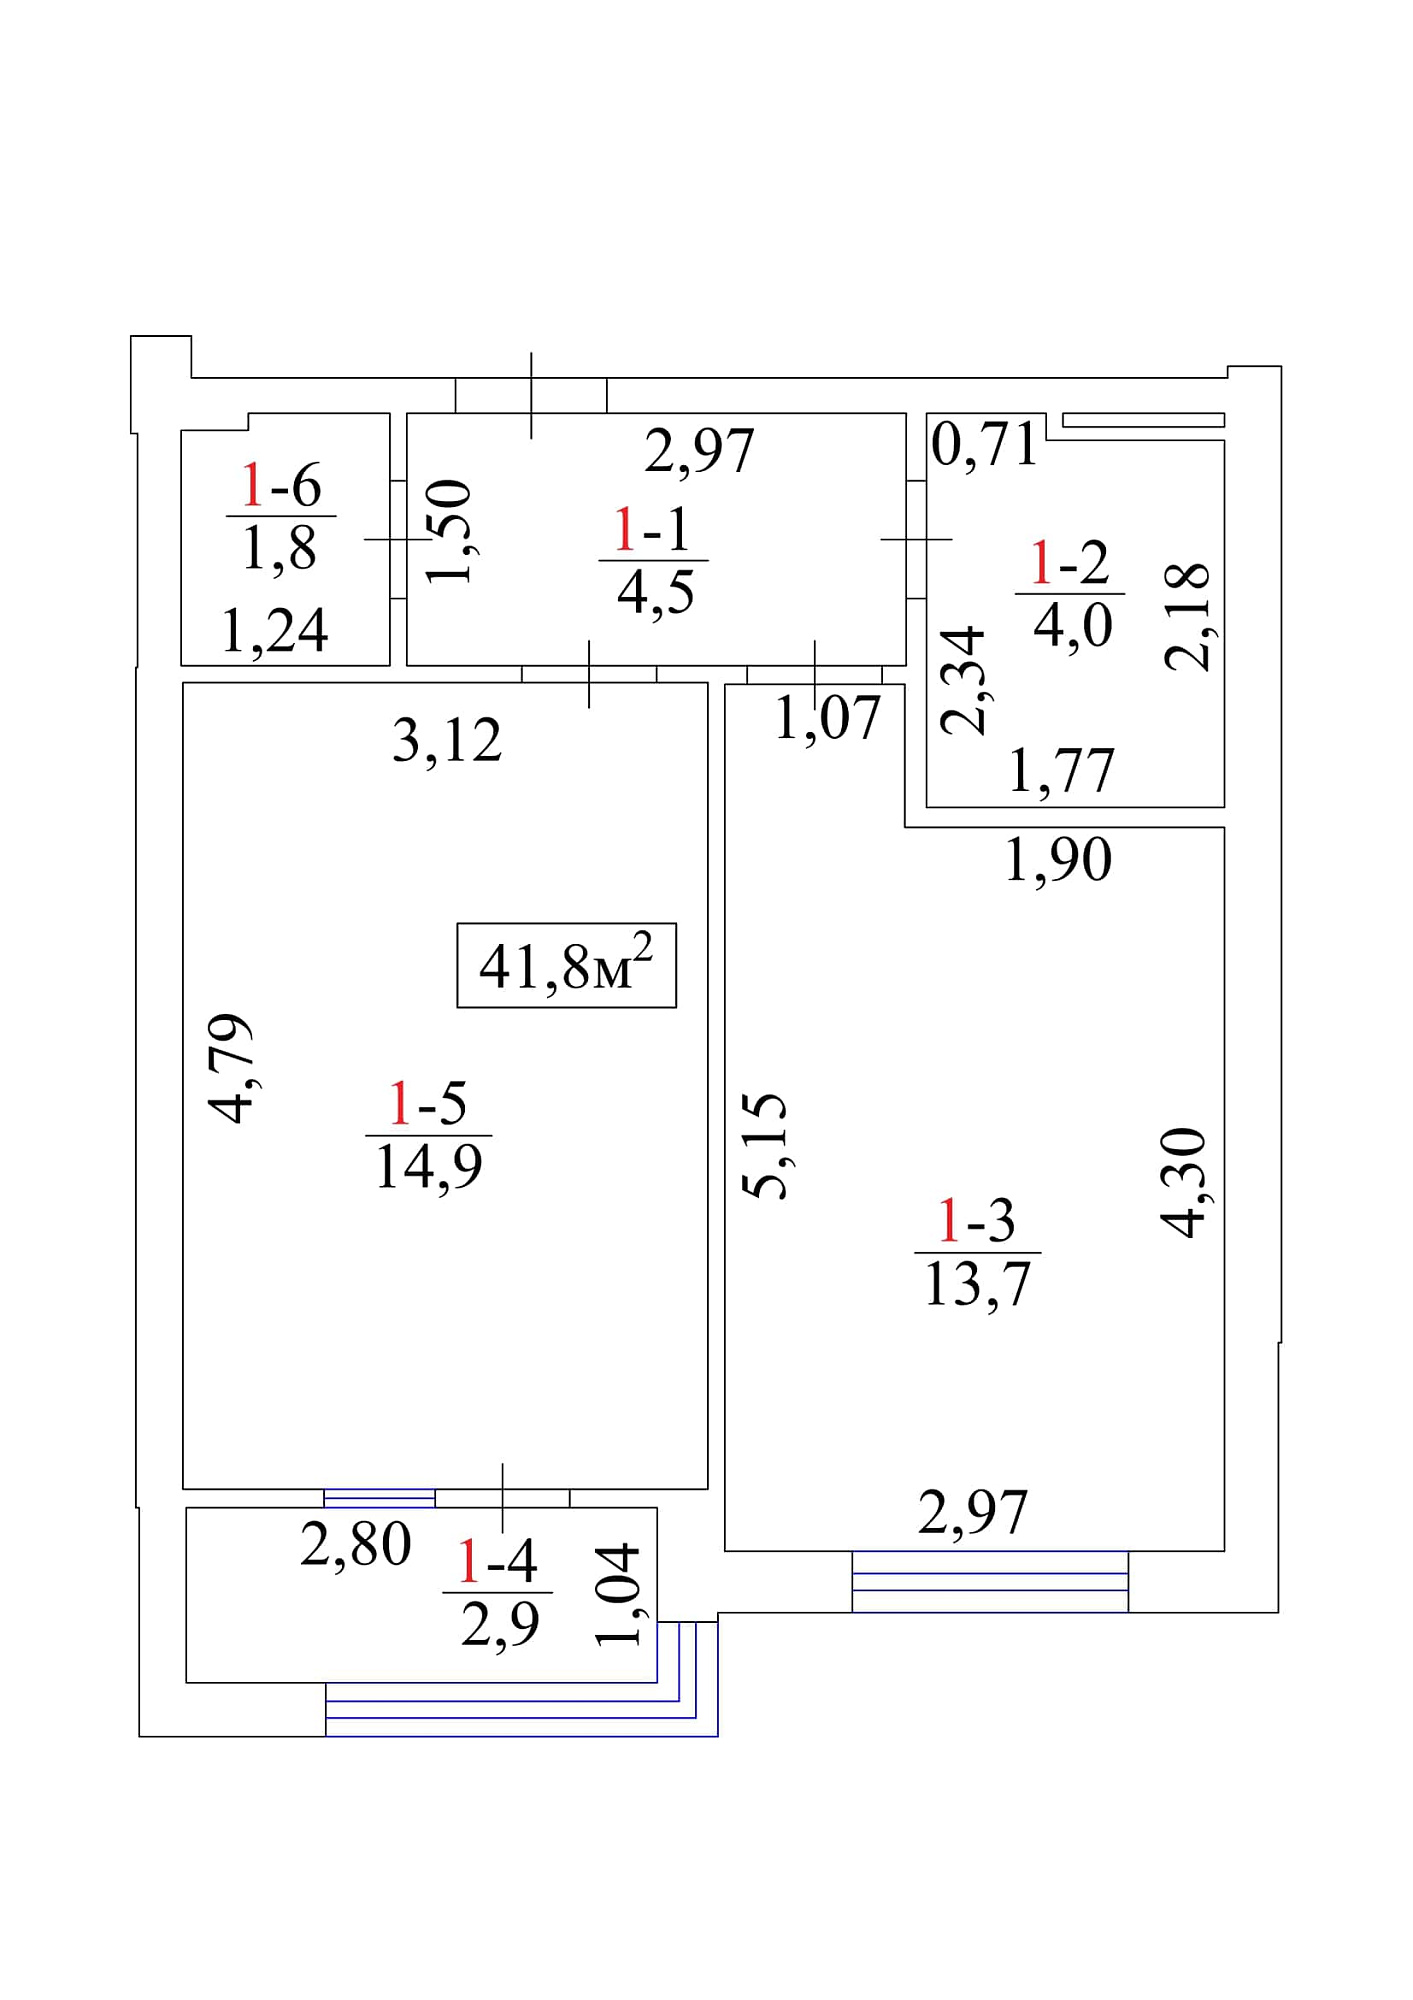 Planning 1-rm flats area 41.8m2, AB-01-01/00001.